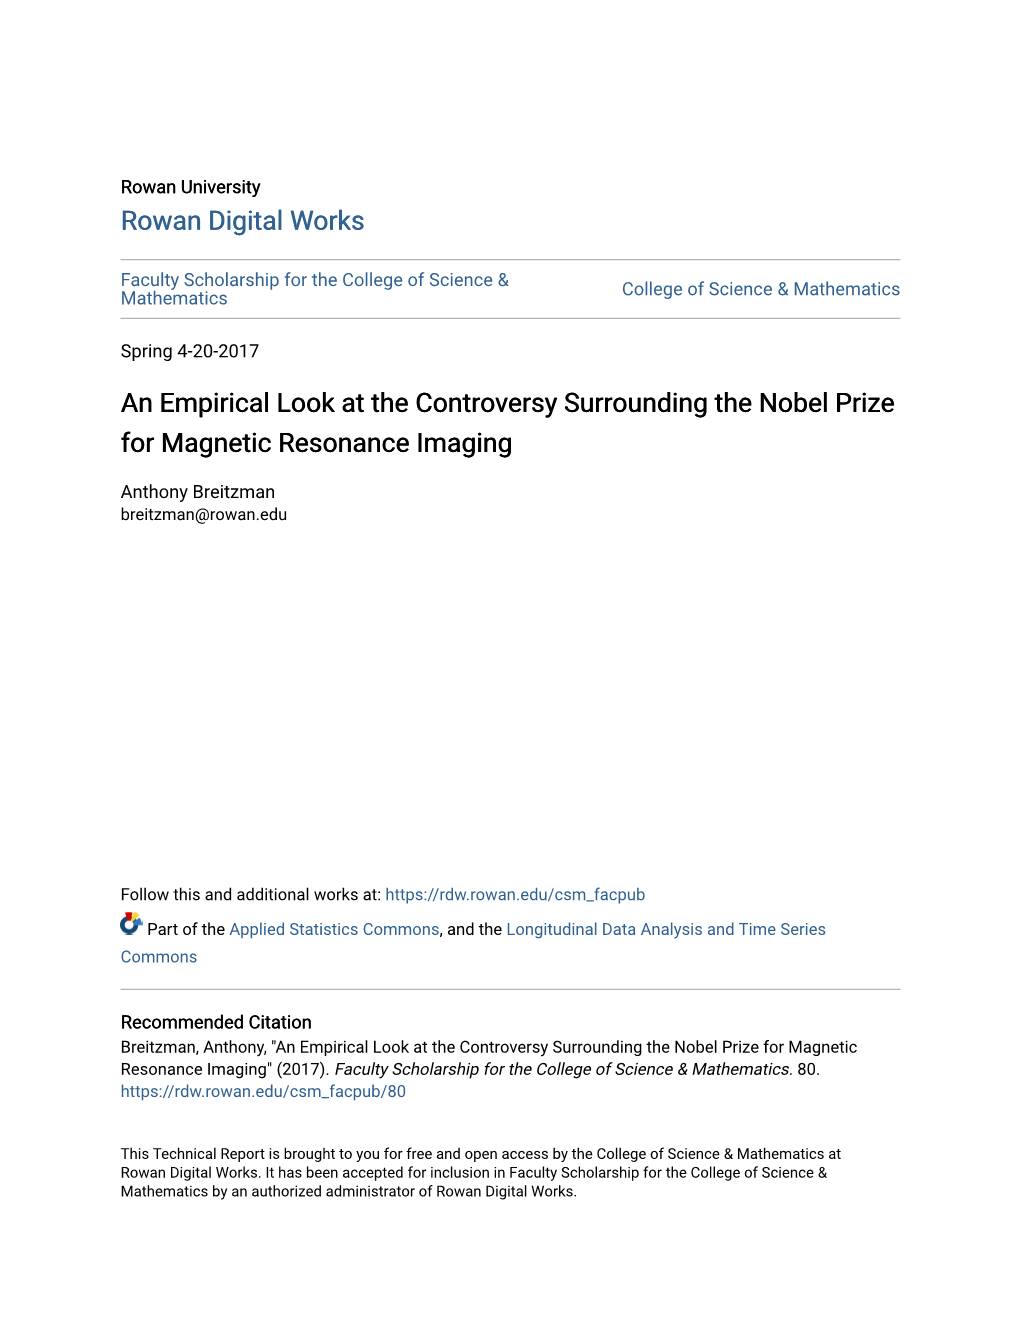 An Empirical Look at the Controversy Surrounding the Nobel Prize for Magnetic Resonance Imaging